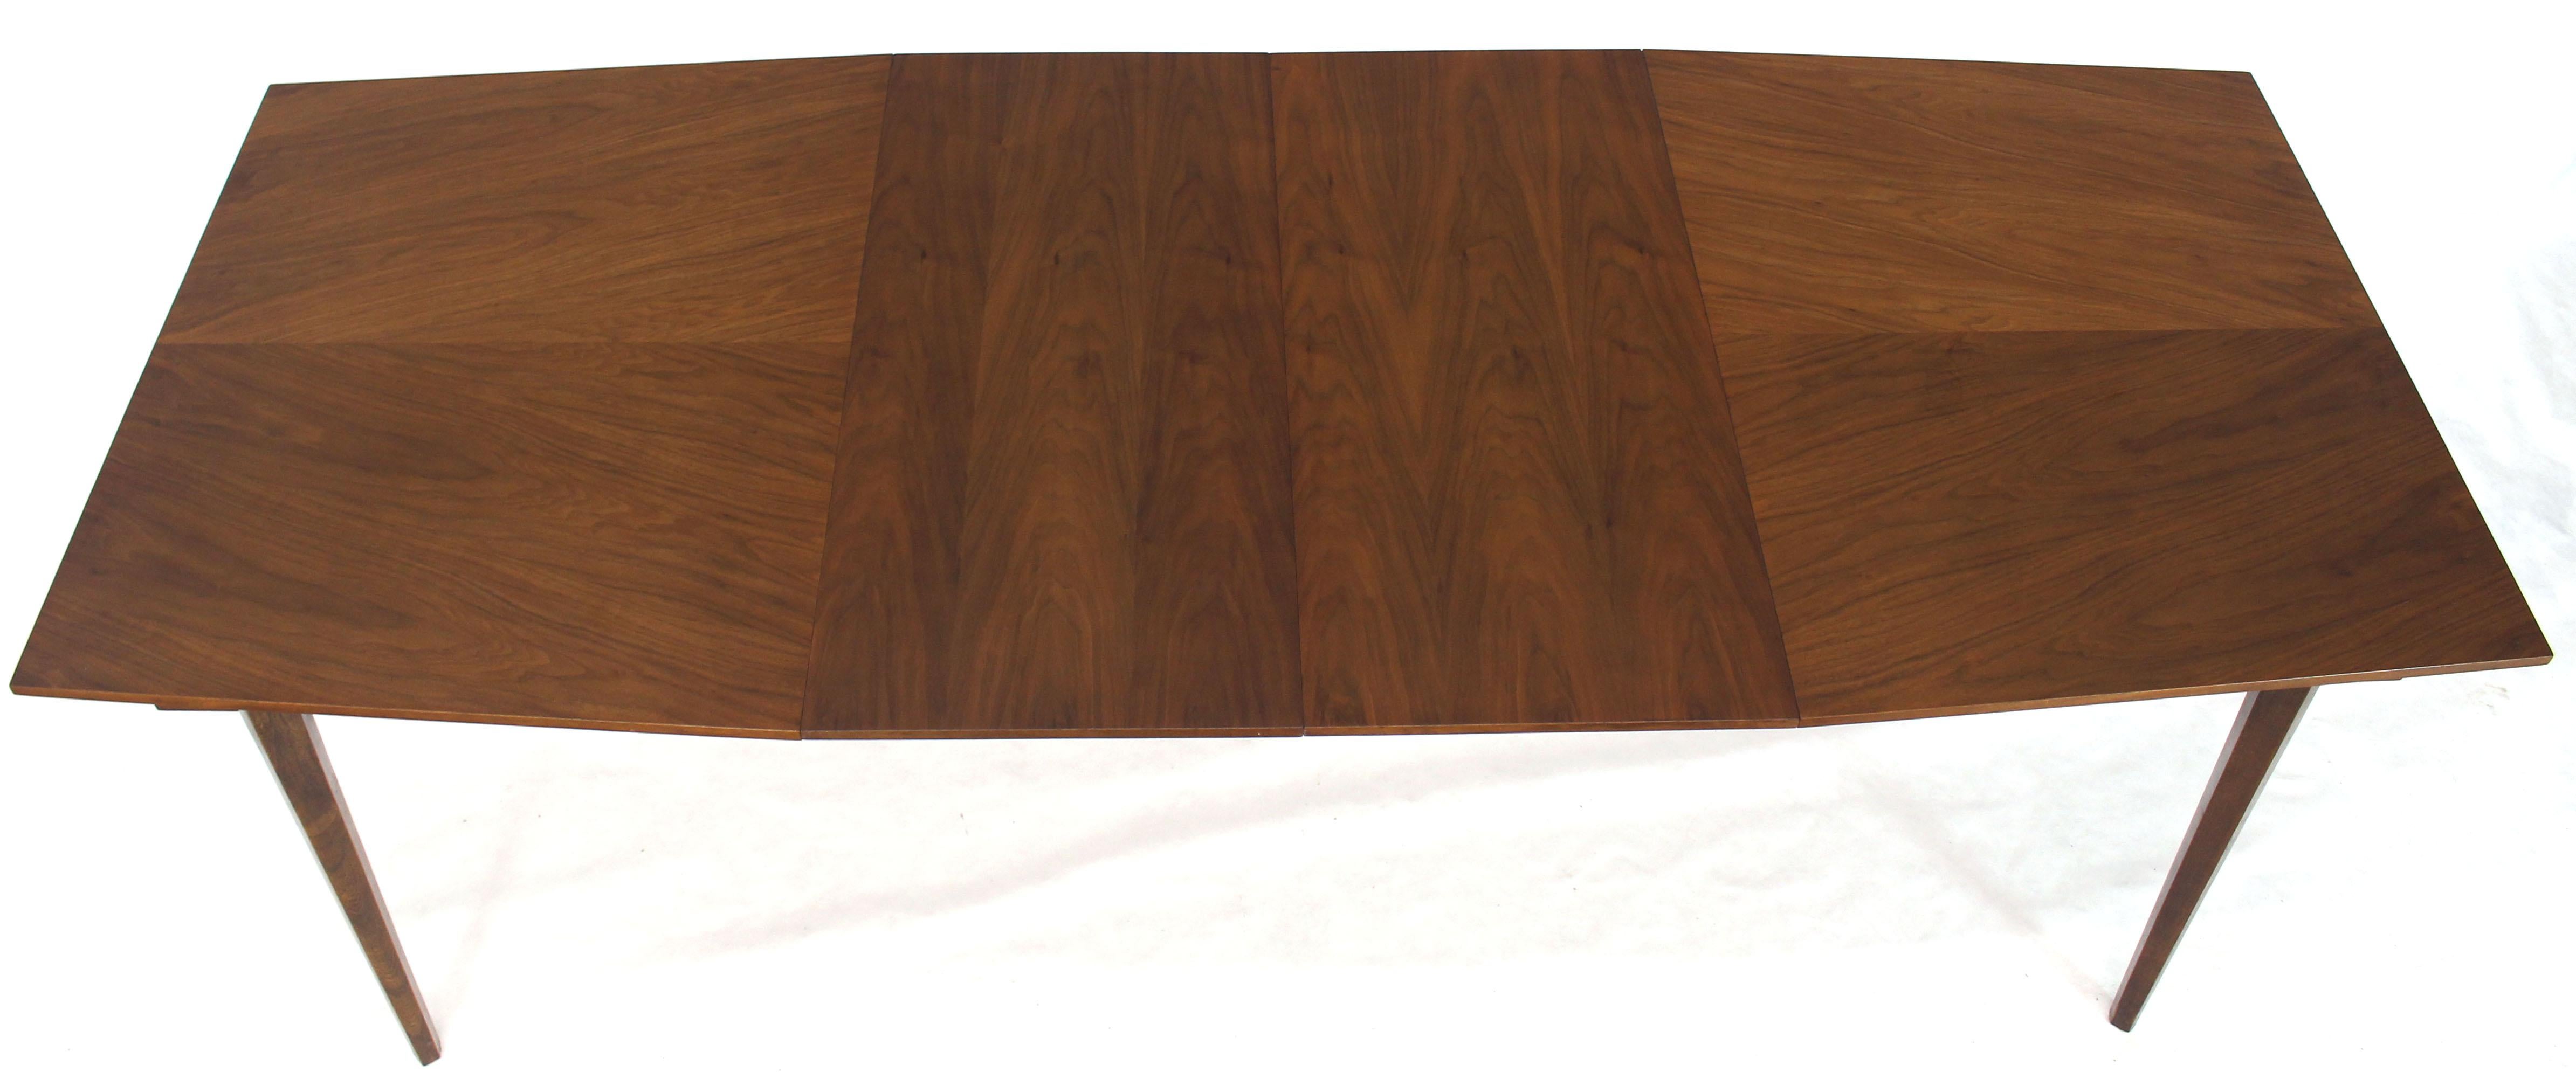 Danish Mid-Century Modern Walnut Wide Rectangle Dining Table 2 Extension Boards For Sale 4